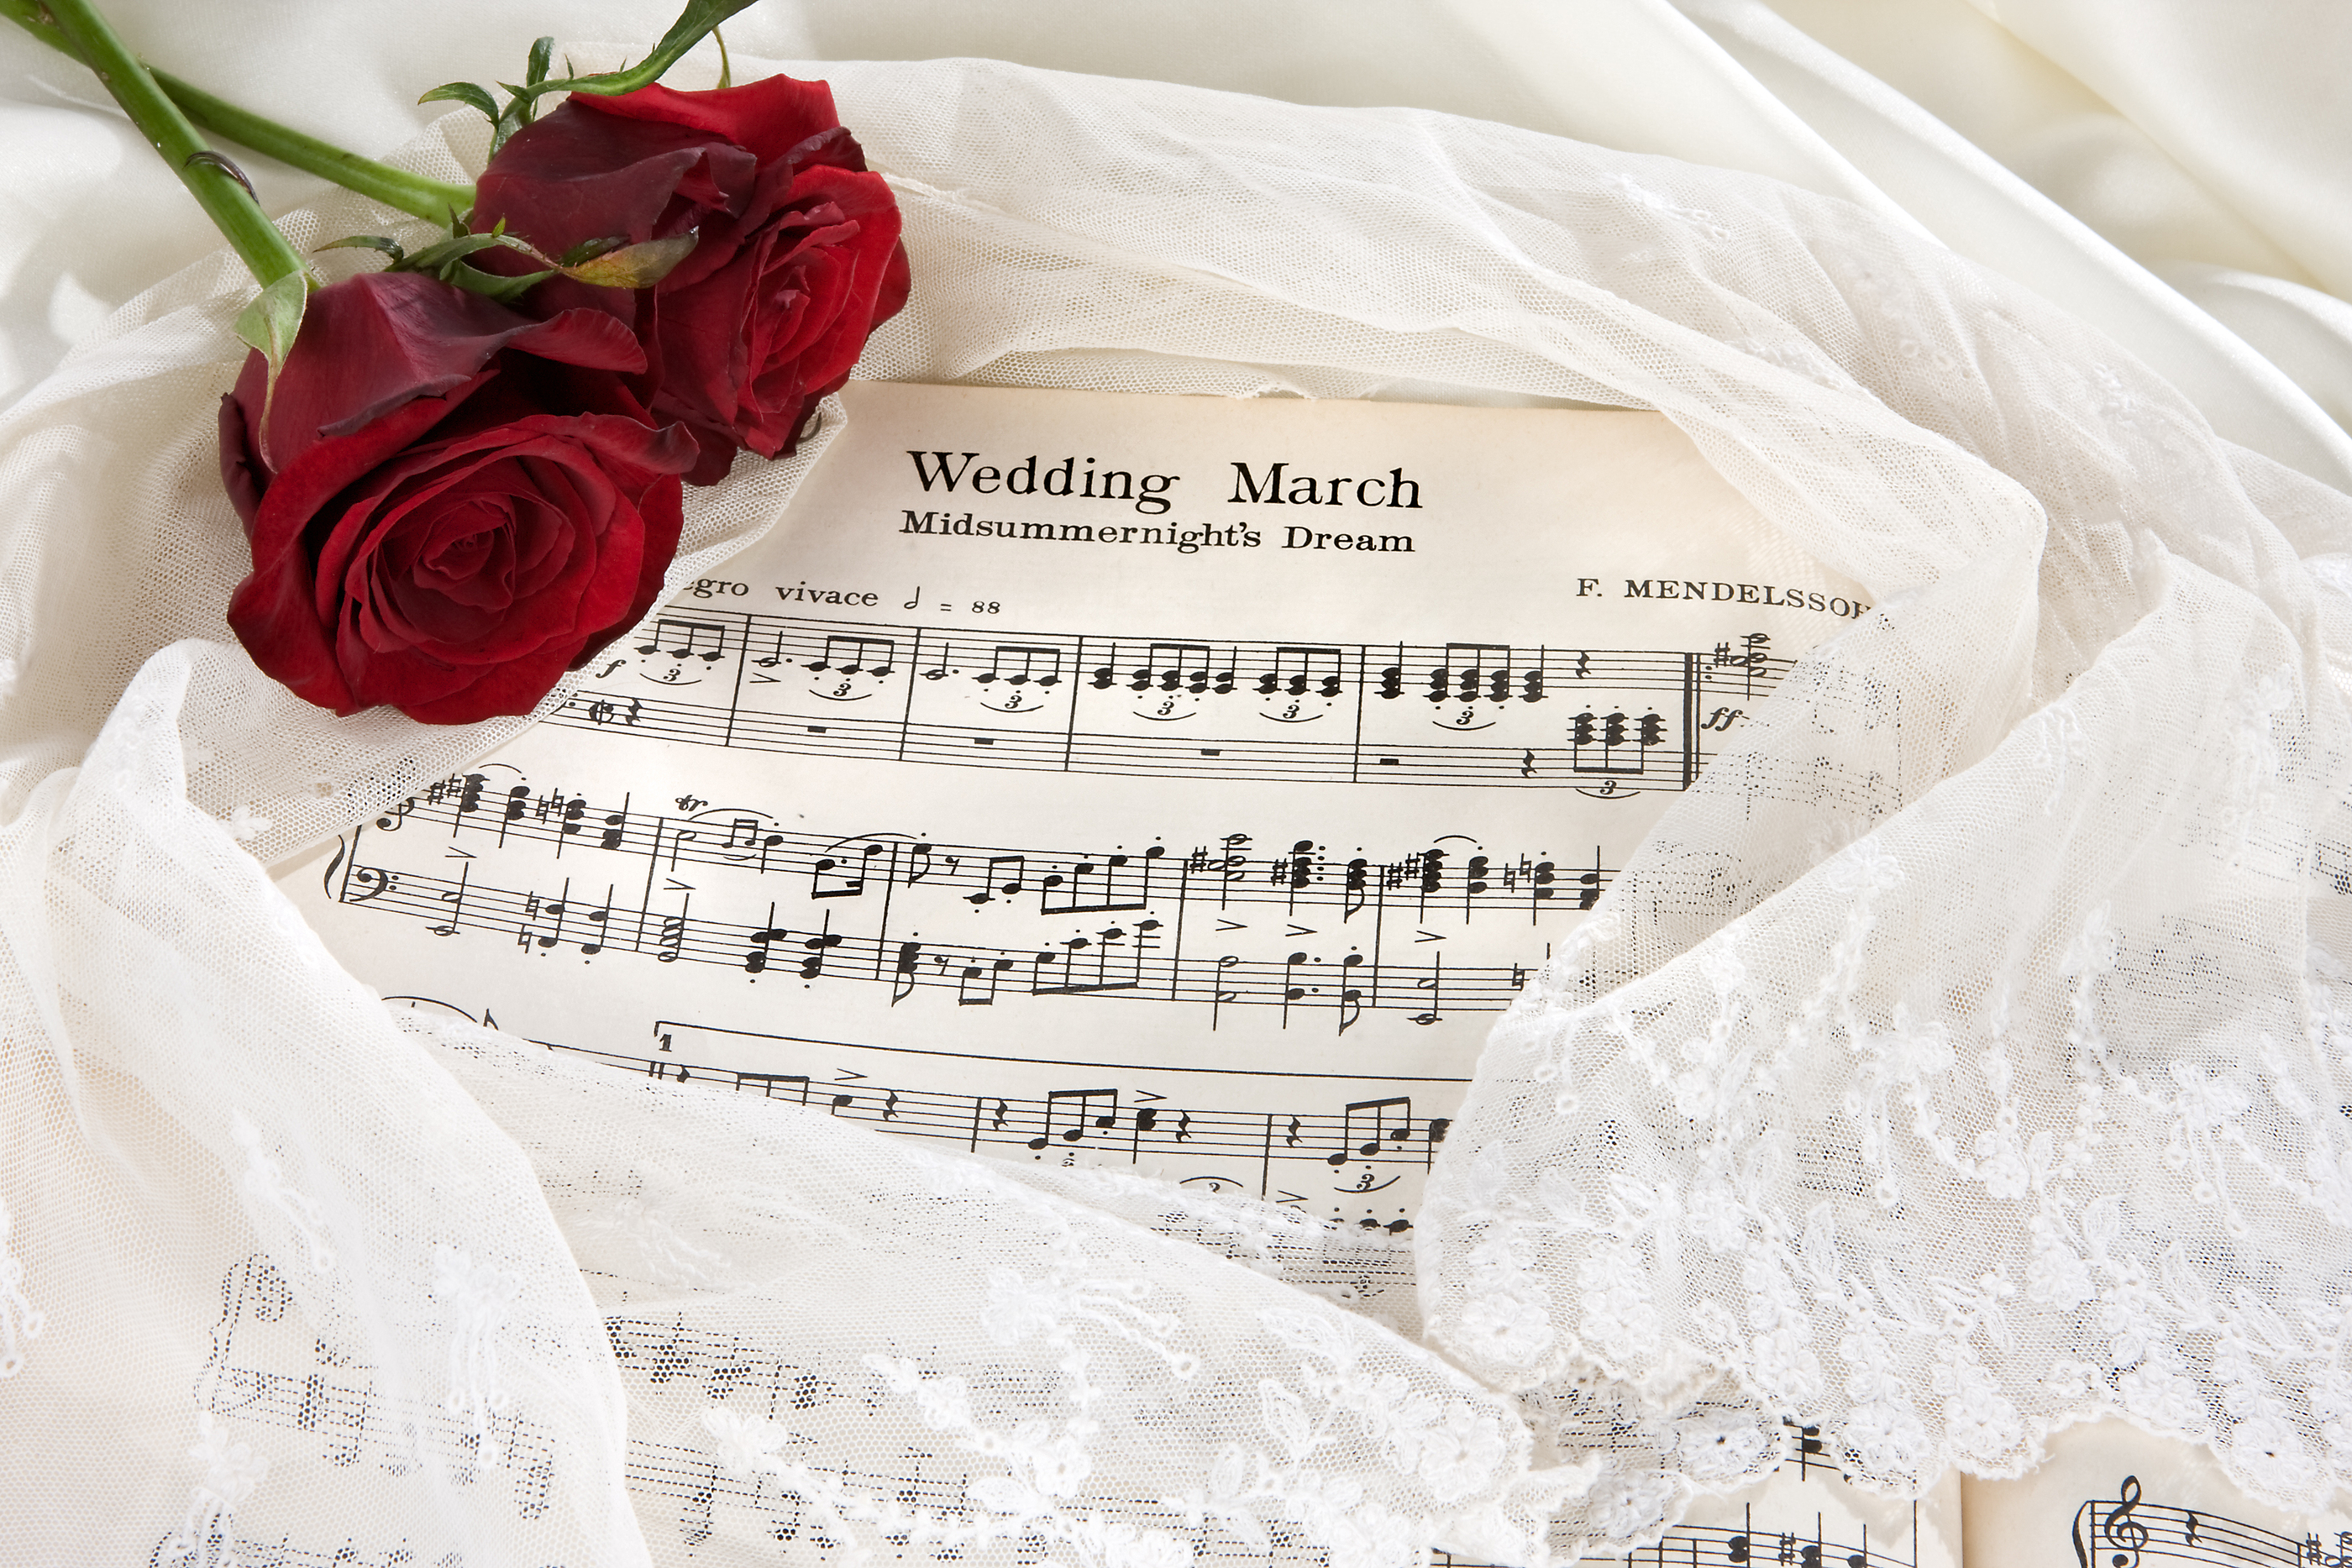 Sheet music of the Wedding March with roses and bridal veil